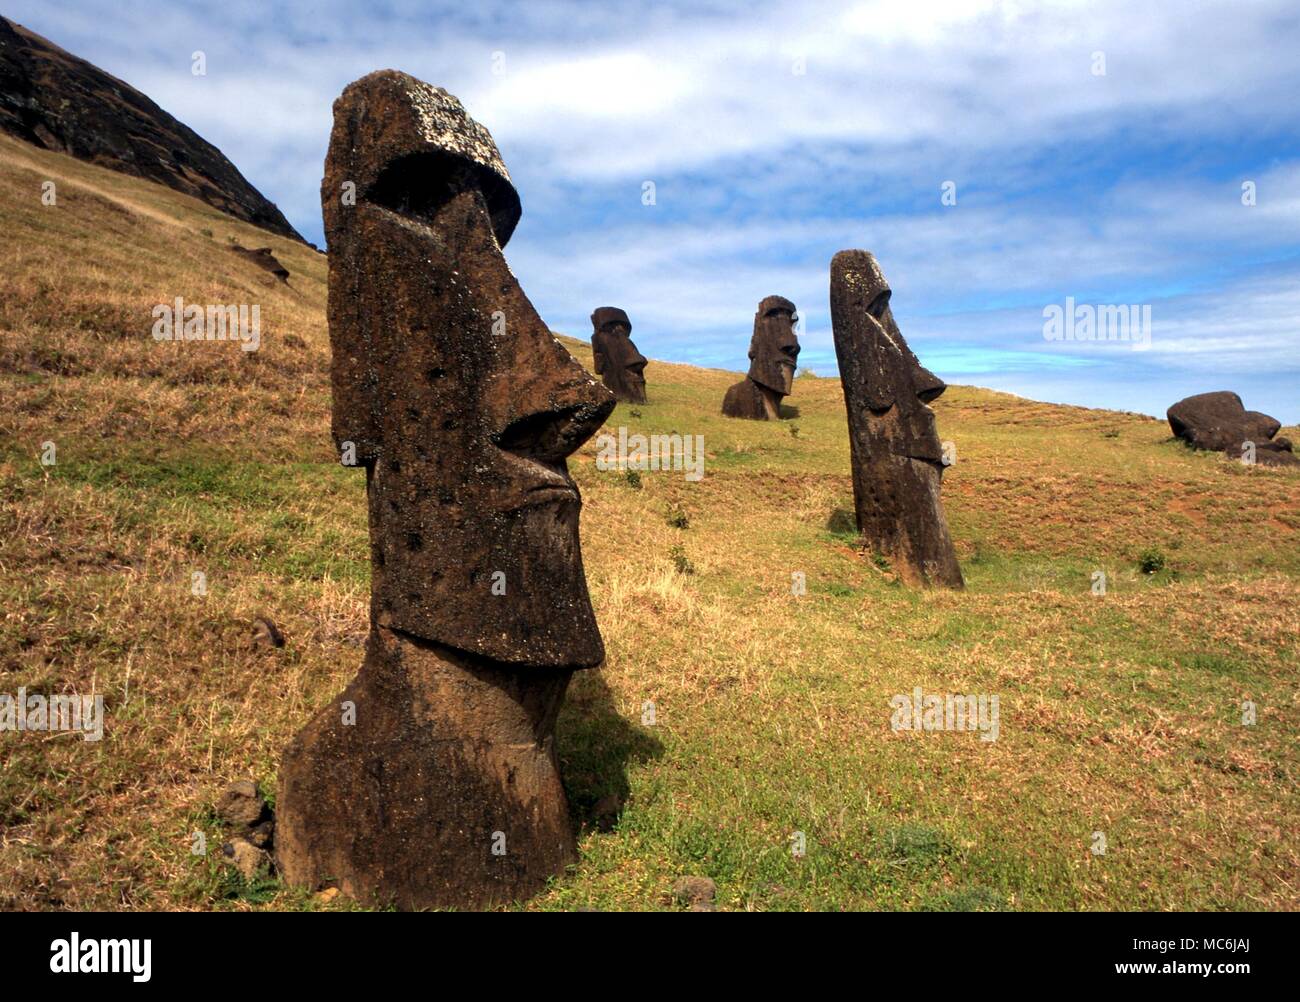 EASTER ISLAND - One of the upright giant statues near the ancient volcanic quarry on Easter Island Stock Photo